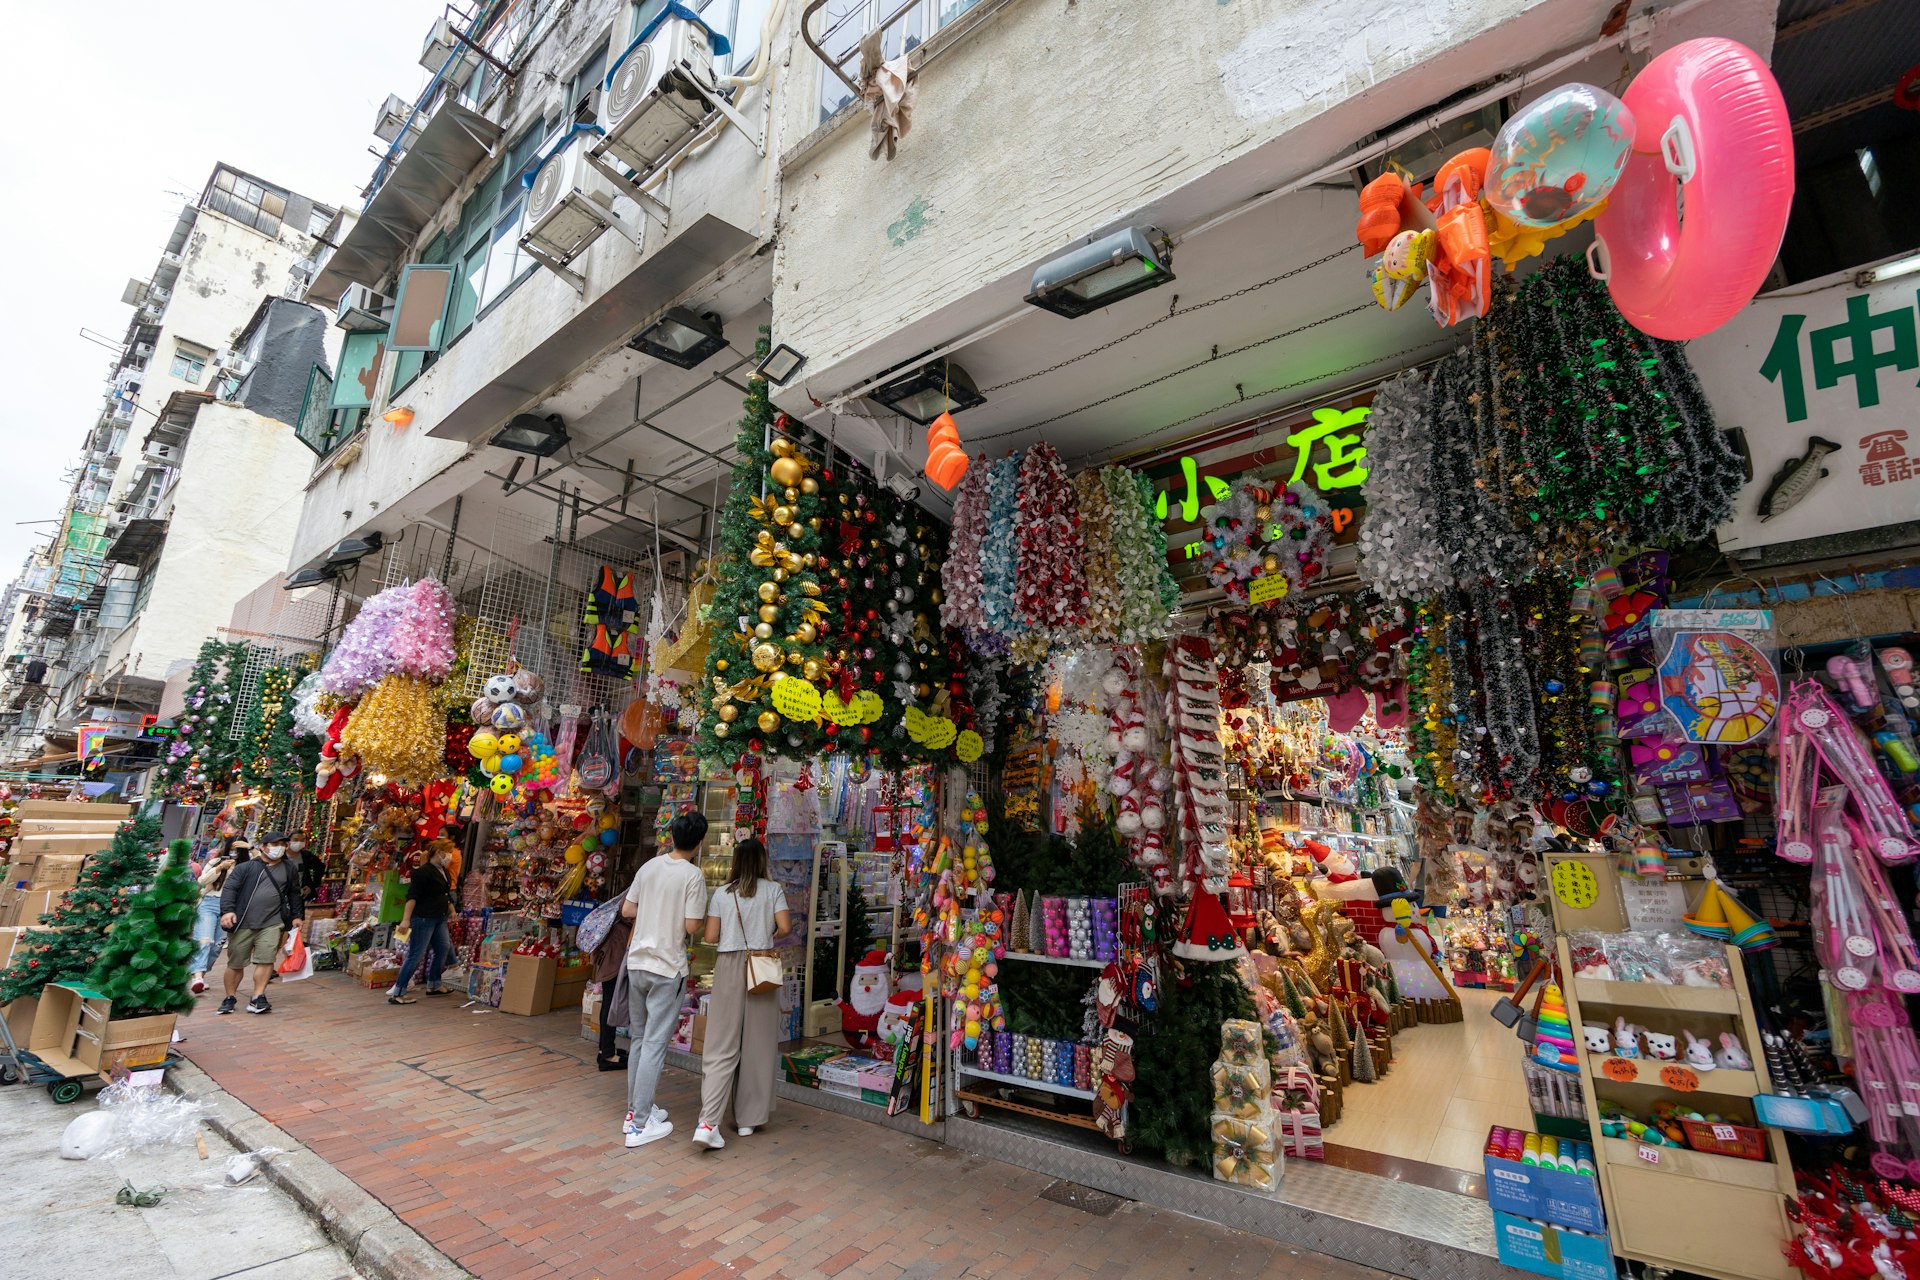 Christmas decorations, toys and bric-a-brac for sale outside stores in Hong Kong